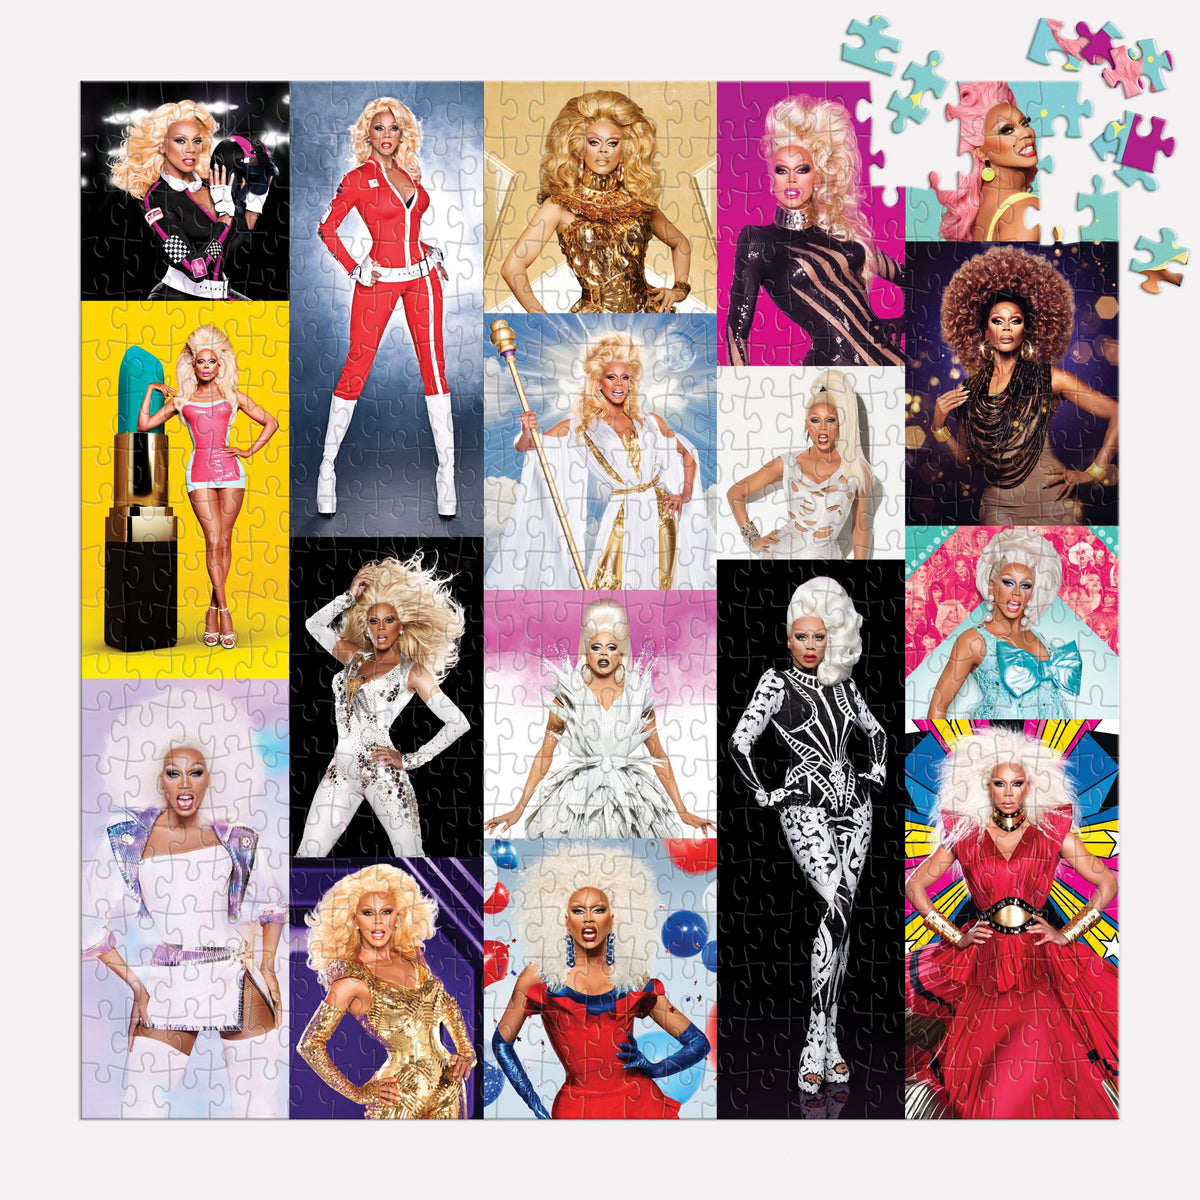 RuPaul's Drag Race 500 Piece Jigsaw Puzzle 500 Piece Puzzles World of Wonder Productions Inc. 